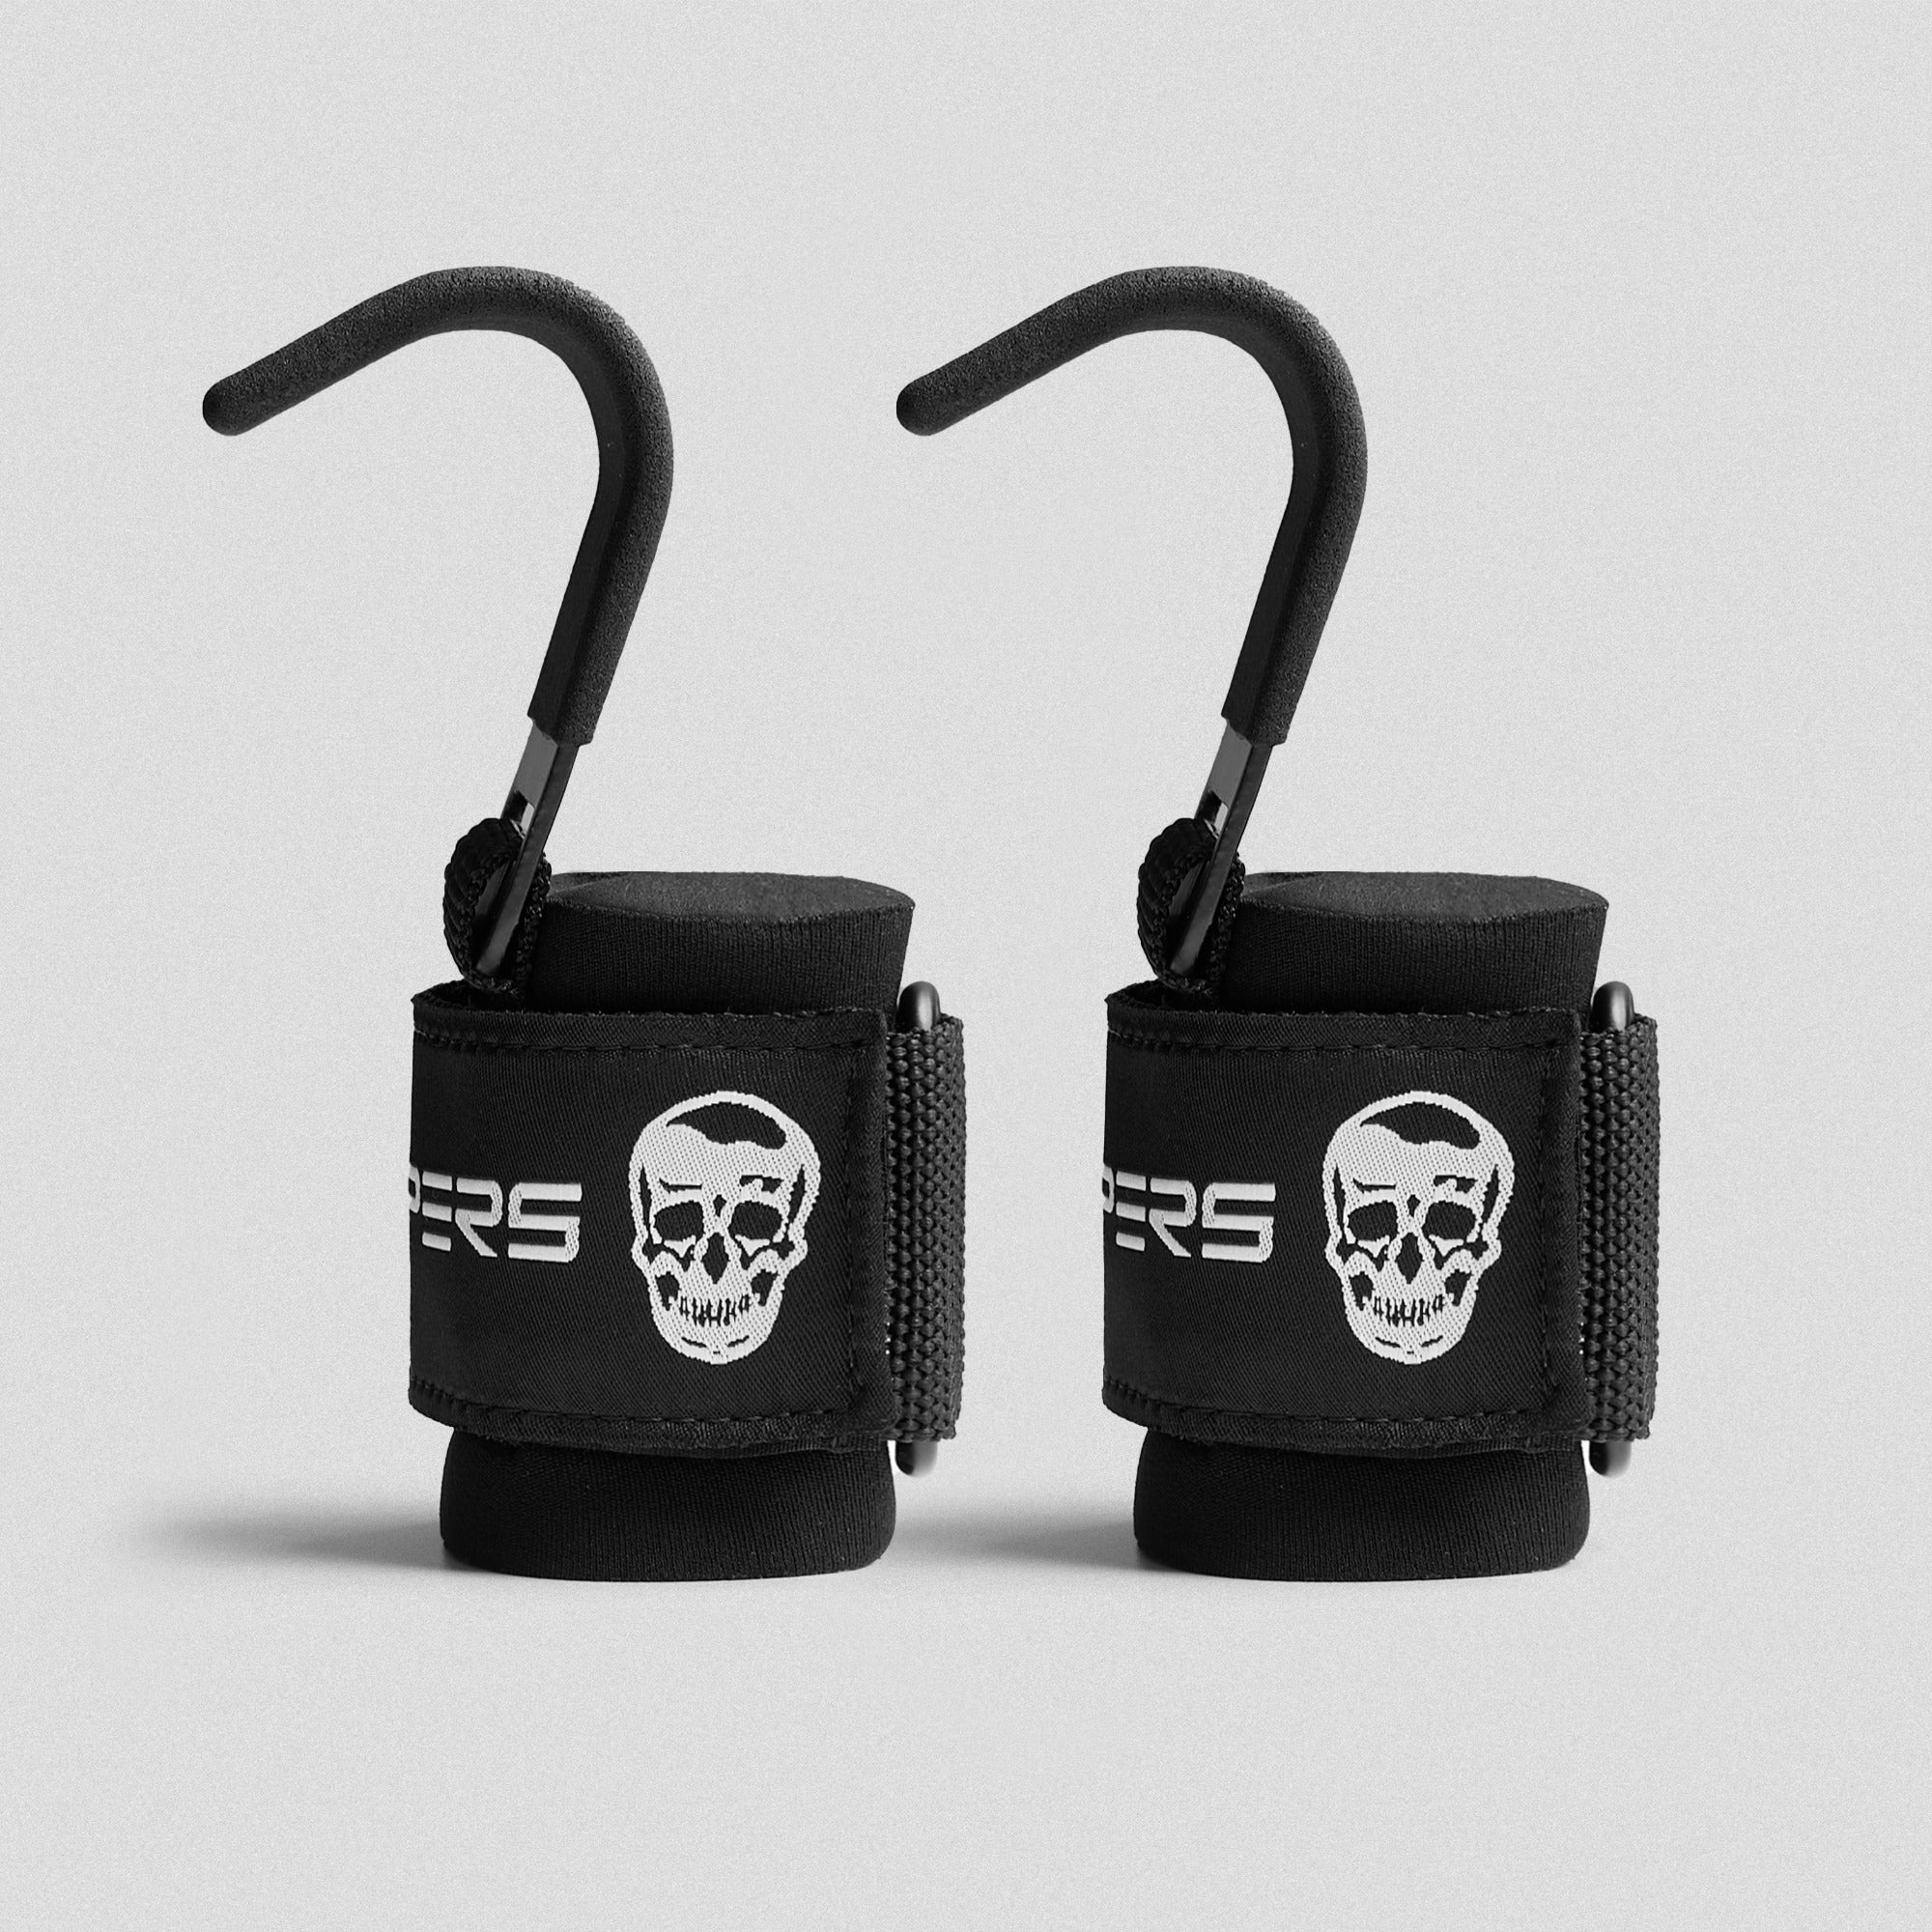 Weightlifting Hooks Made of Iron w/ Wrist Straps, Black - Estremo Fitness